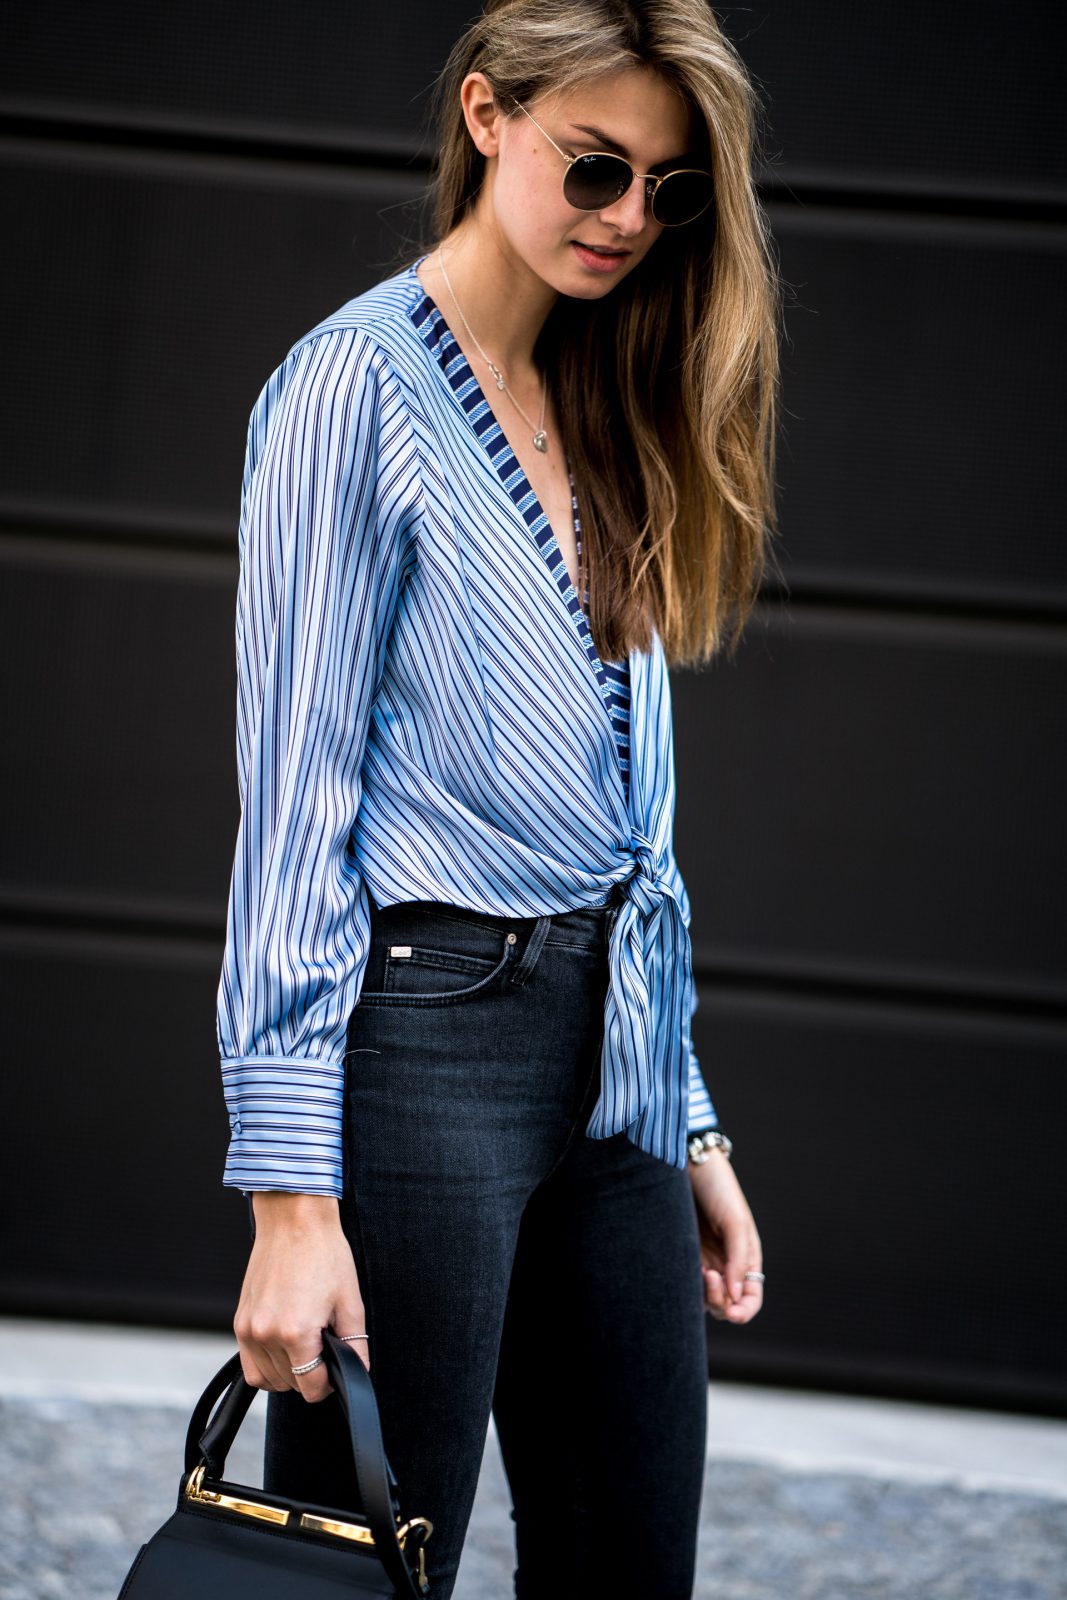 Striped Body with a low neckline || Fashion Week Berlin Outfit